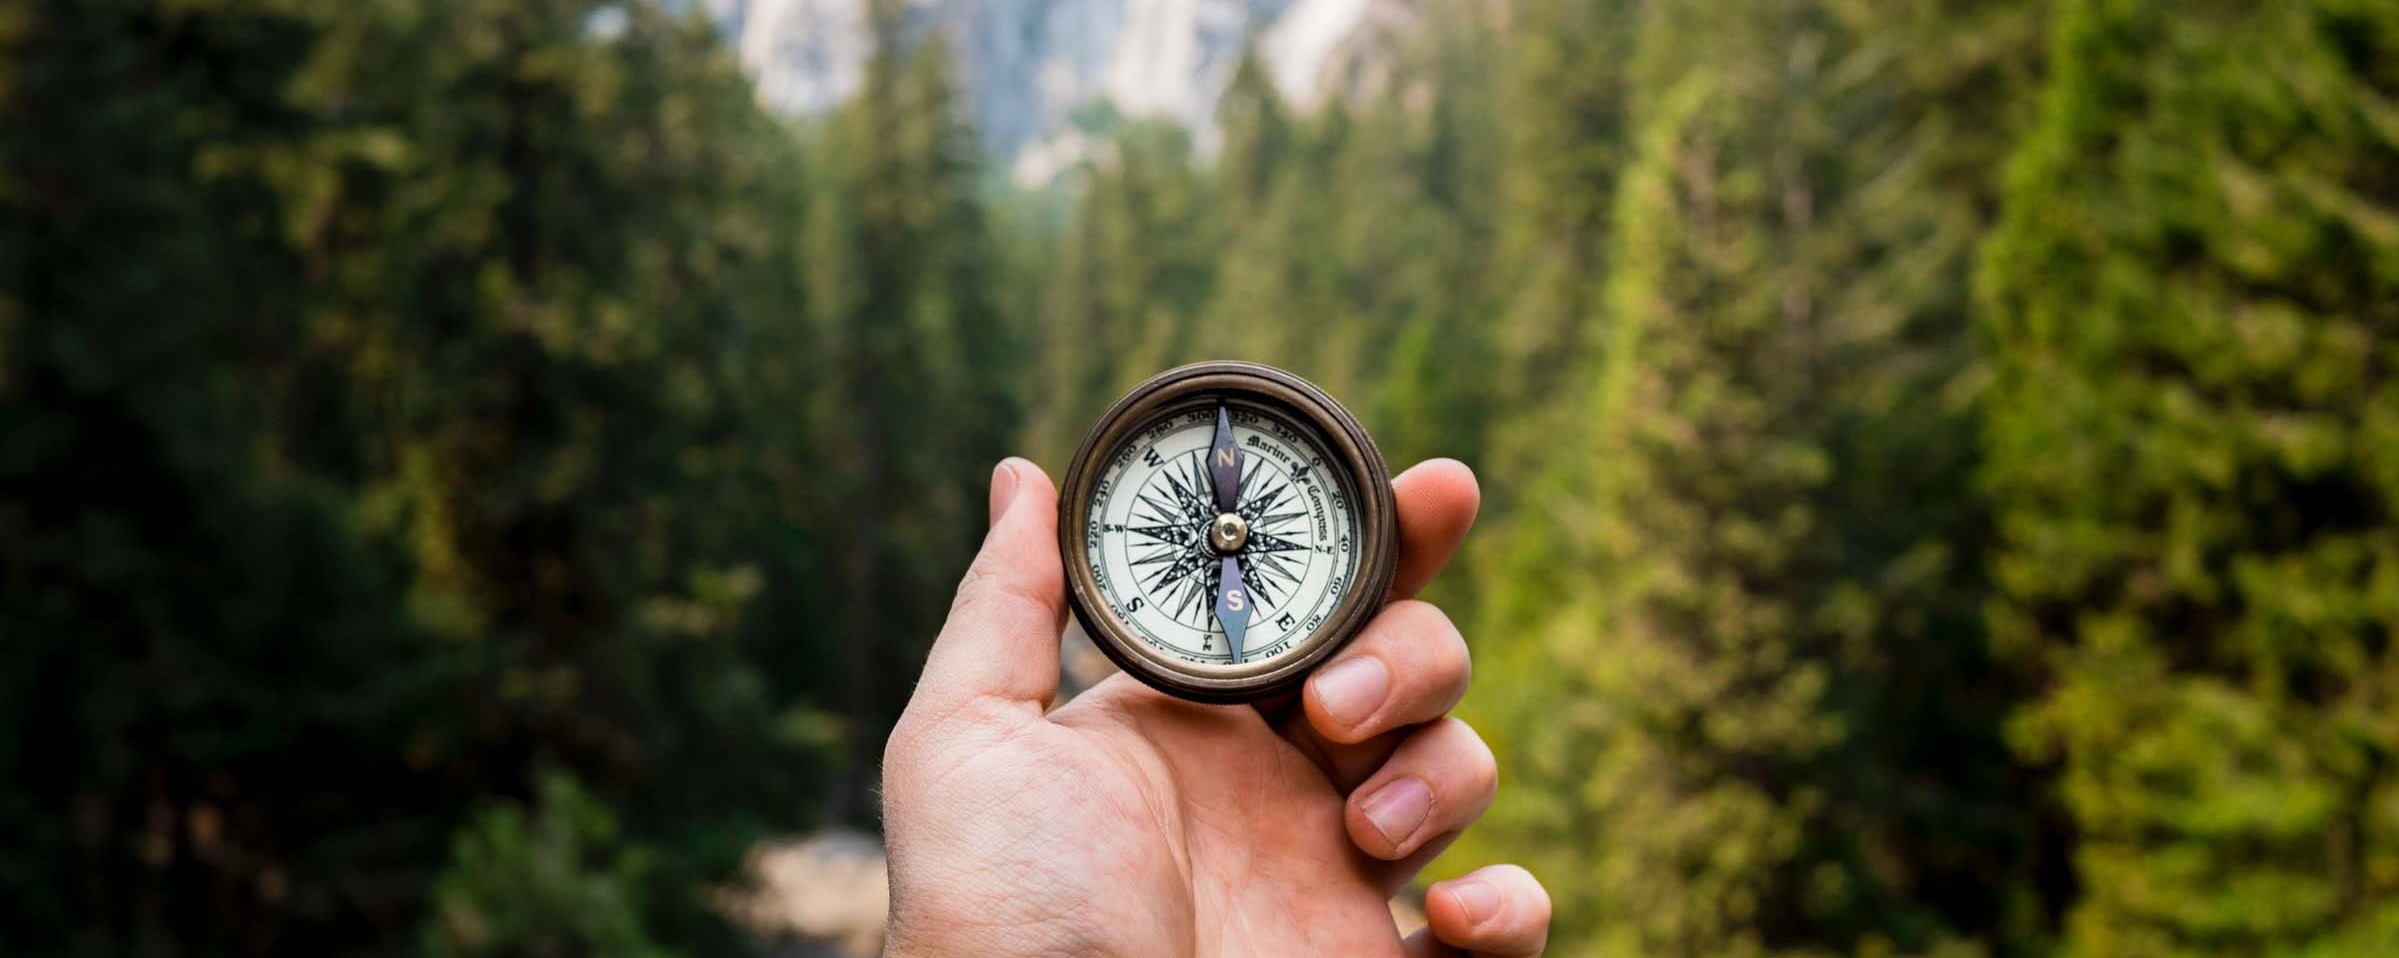 Male hand holding a compass with green mountain scene background